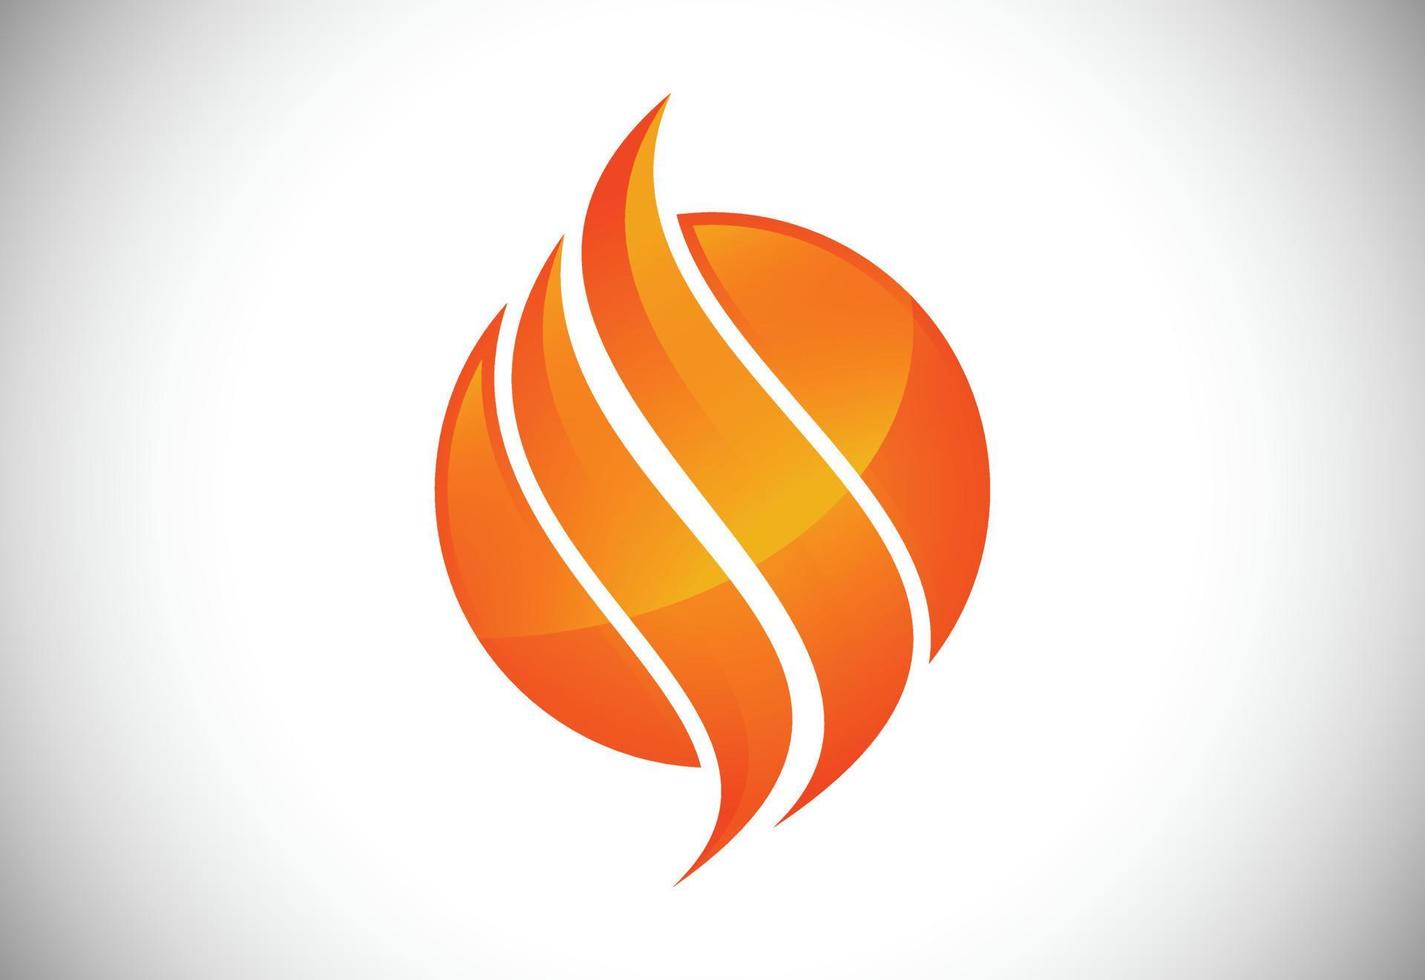 Flame logo design. Fire icon, oil and gas industry symbol isolated on white background vector